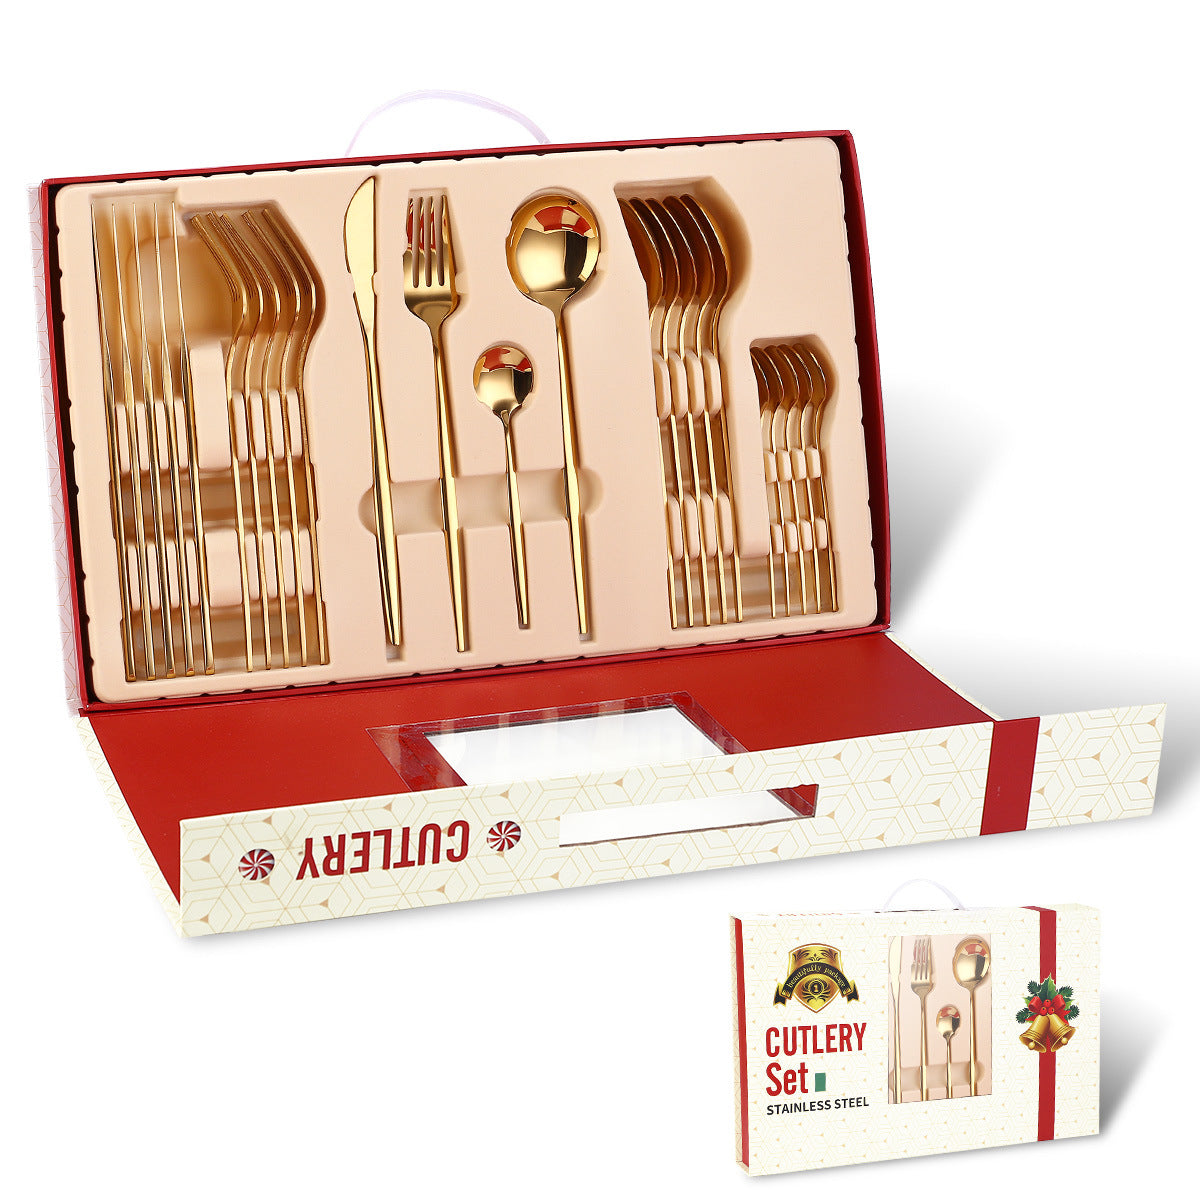 Portugal Stainless Steel Knife, Fork And Spoon Gold-Plated Spray Paint 24-Piece Gift Tableware Set